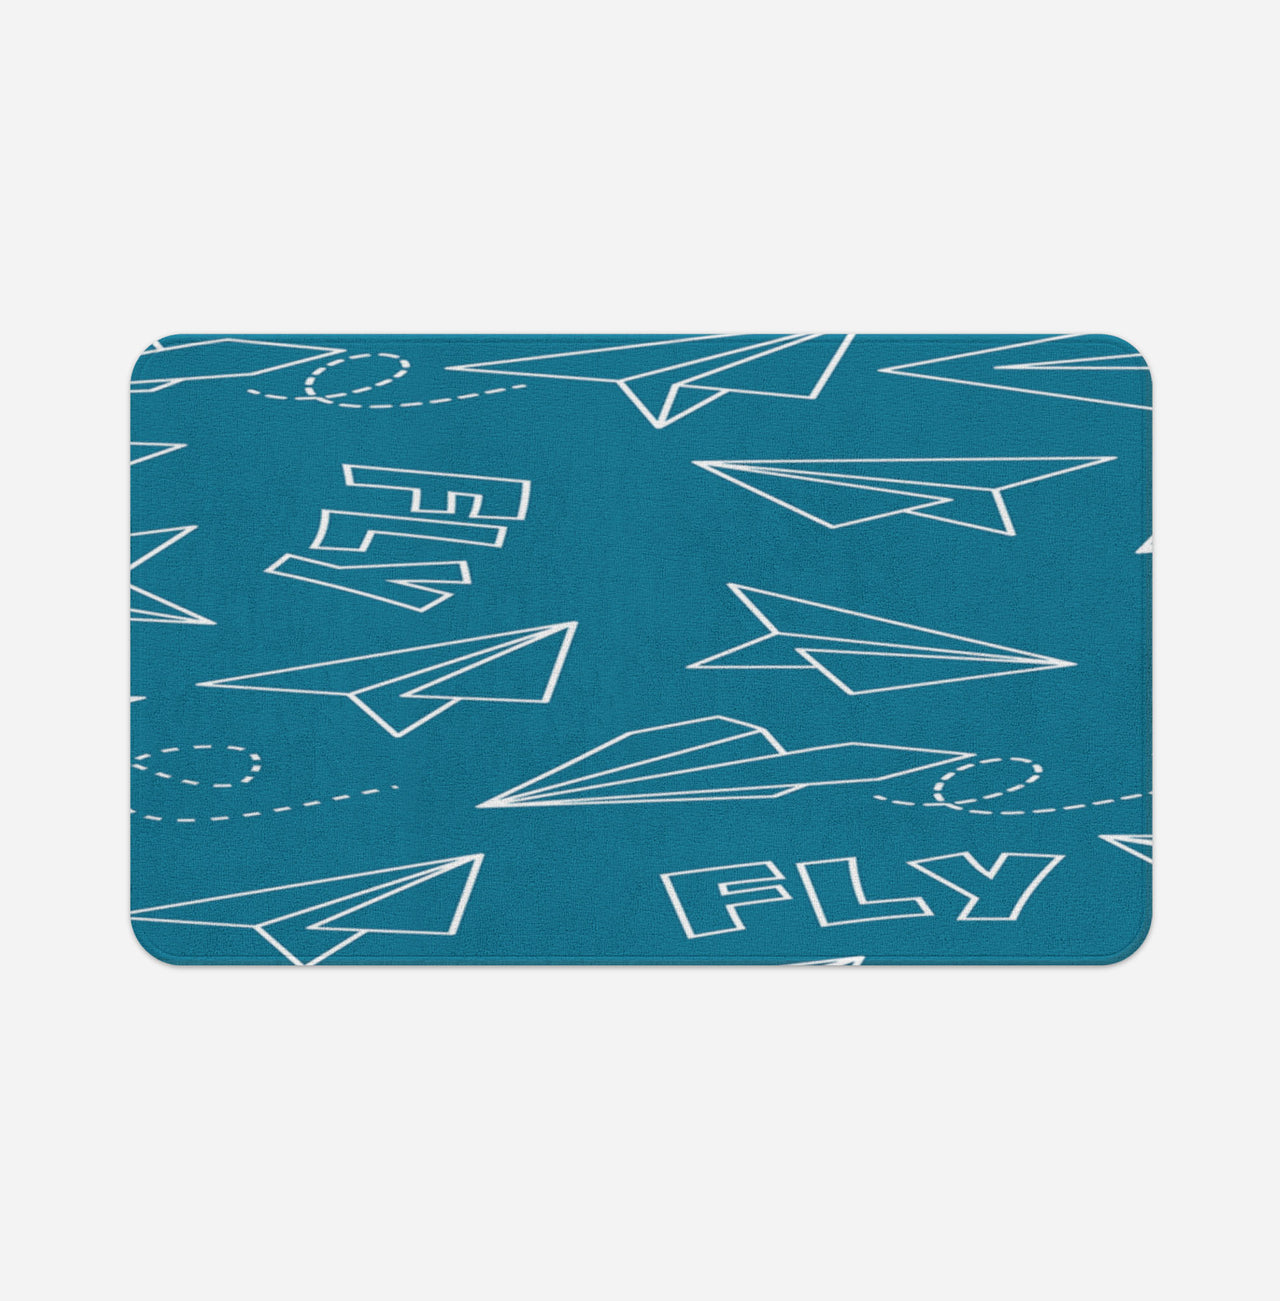 Paper Airplane & Fly-Green Designed Bath Mats